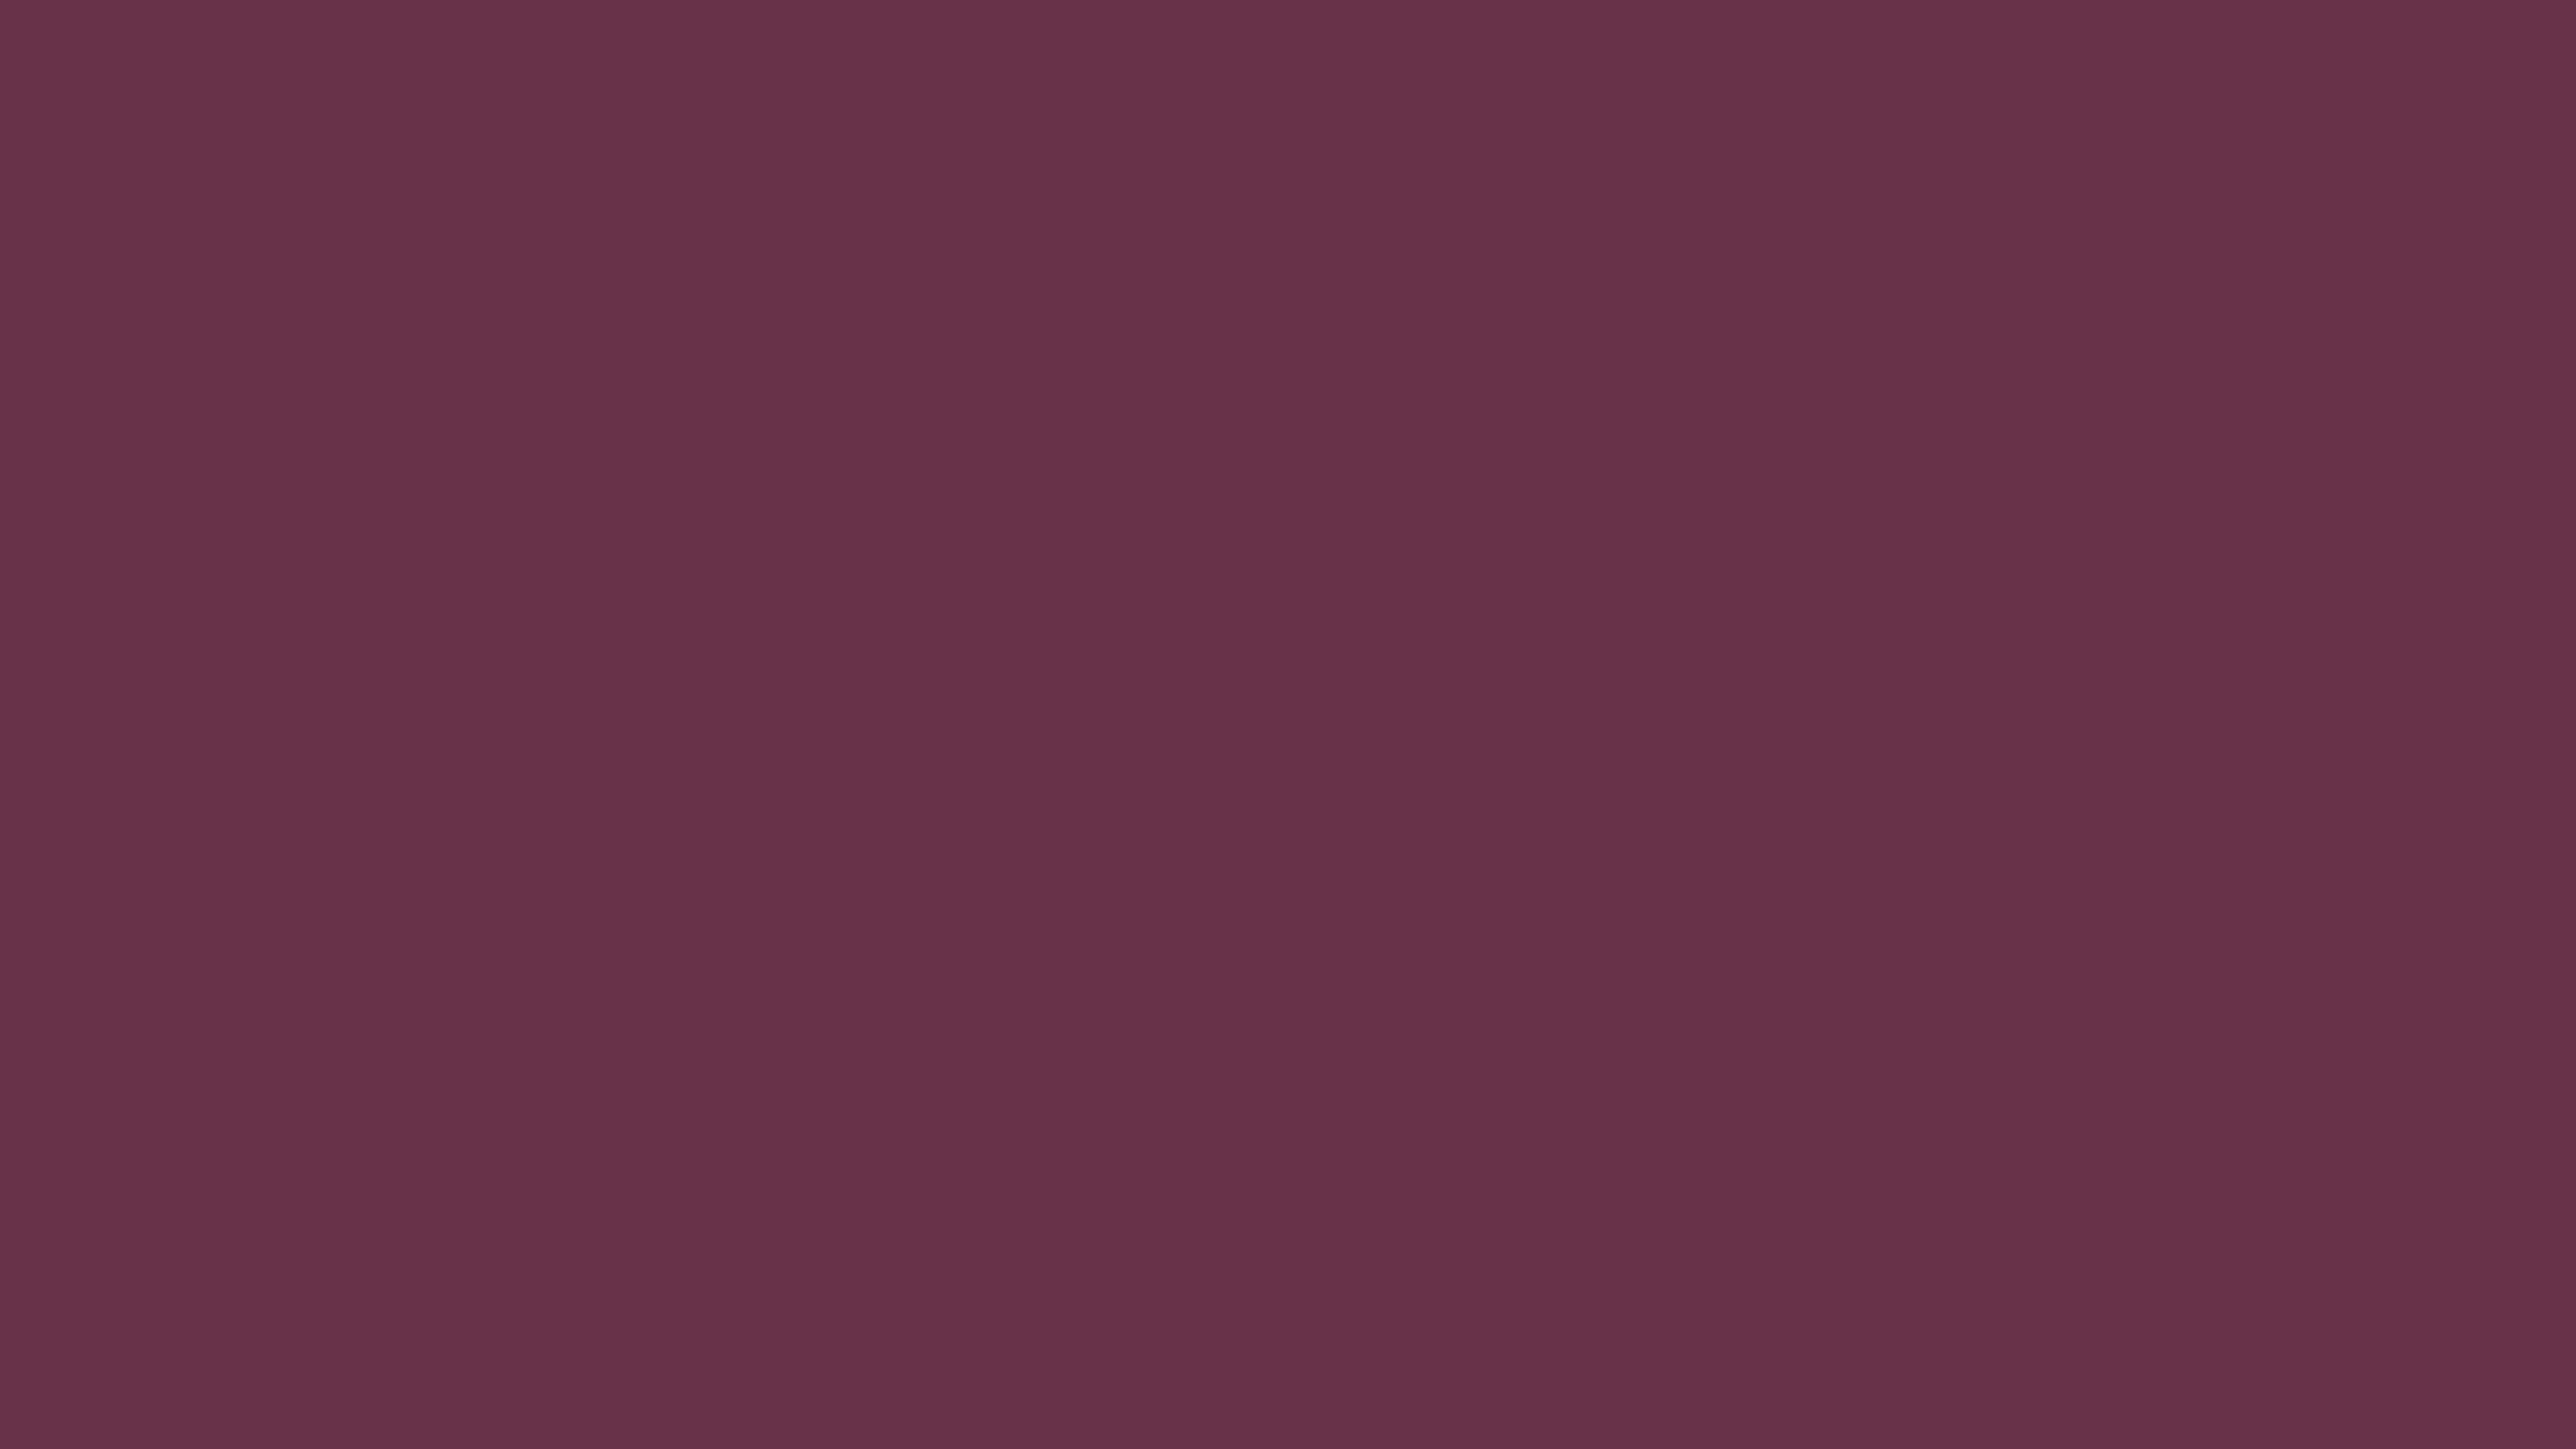 7680x4320 Wine Dregs Solid Color Background